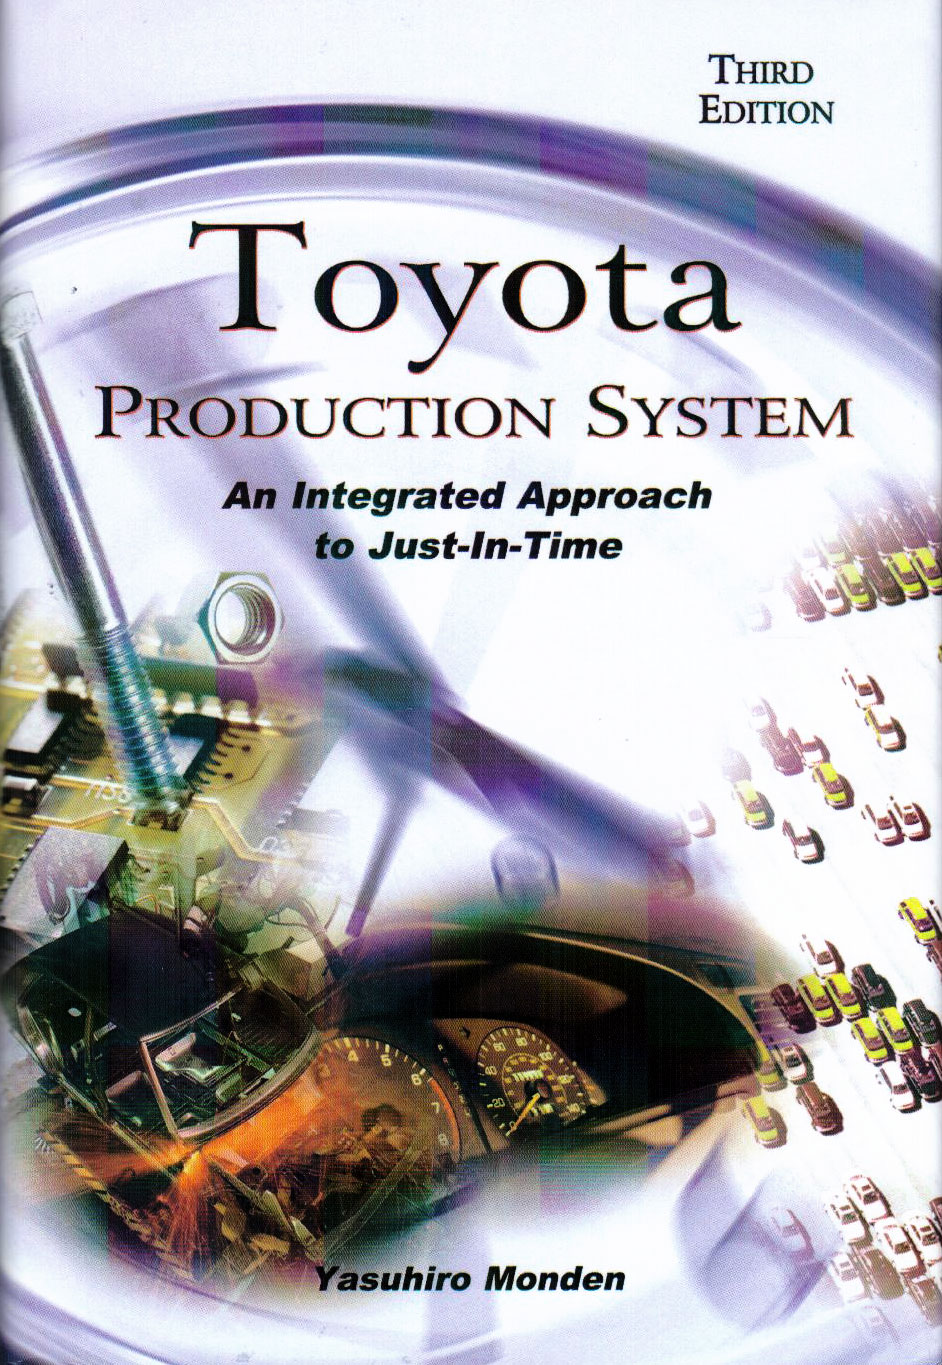 Approach in integrated just production system time toyota